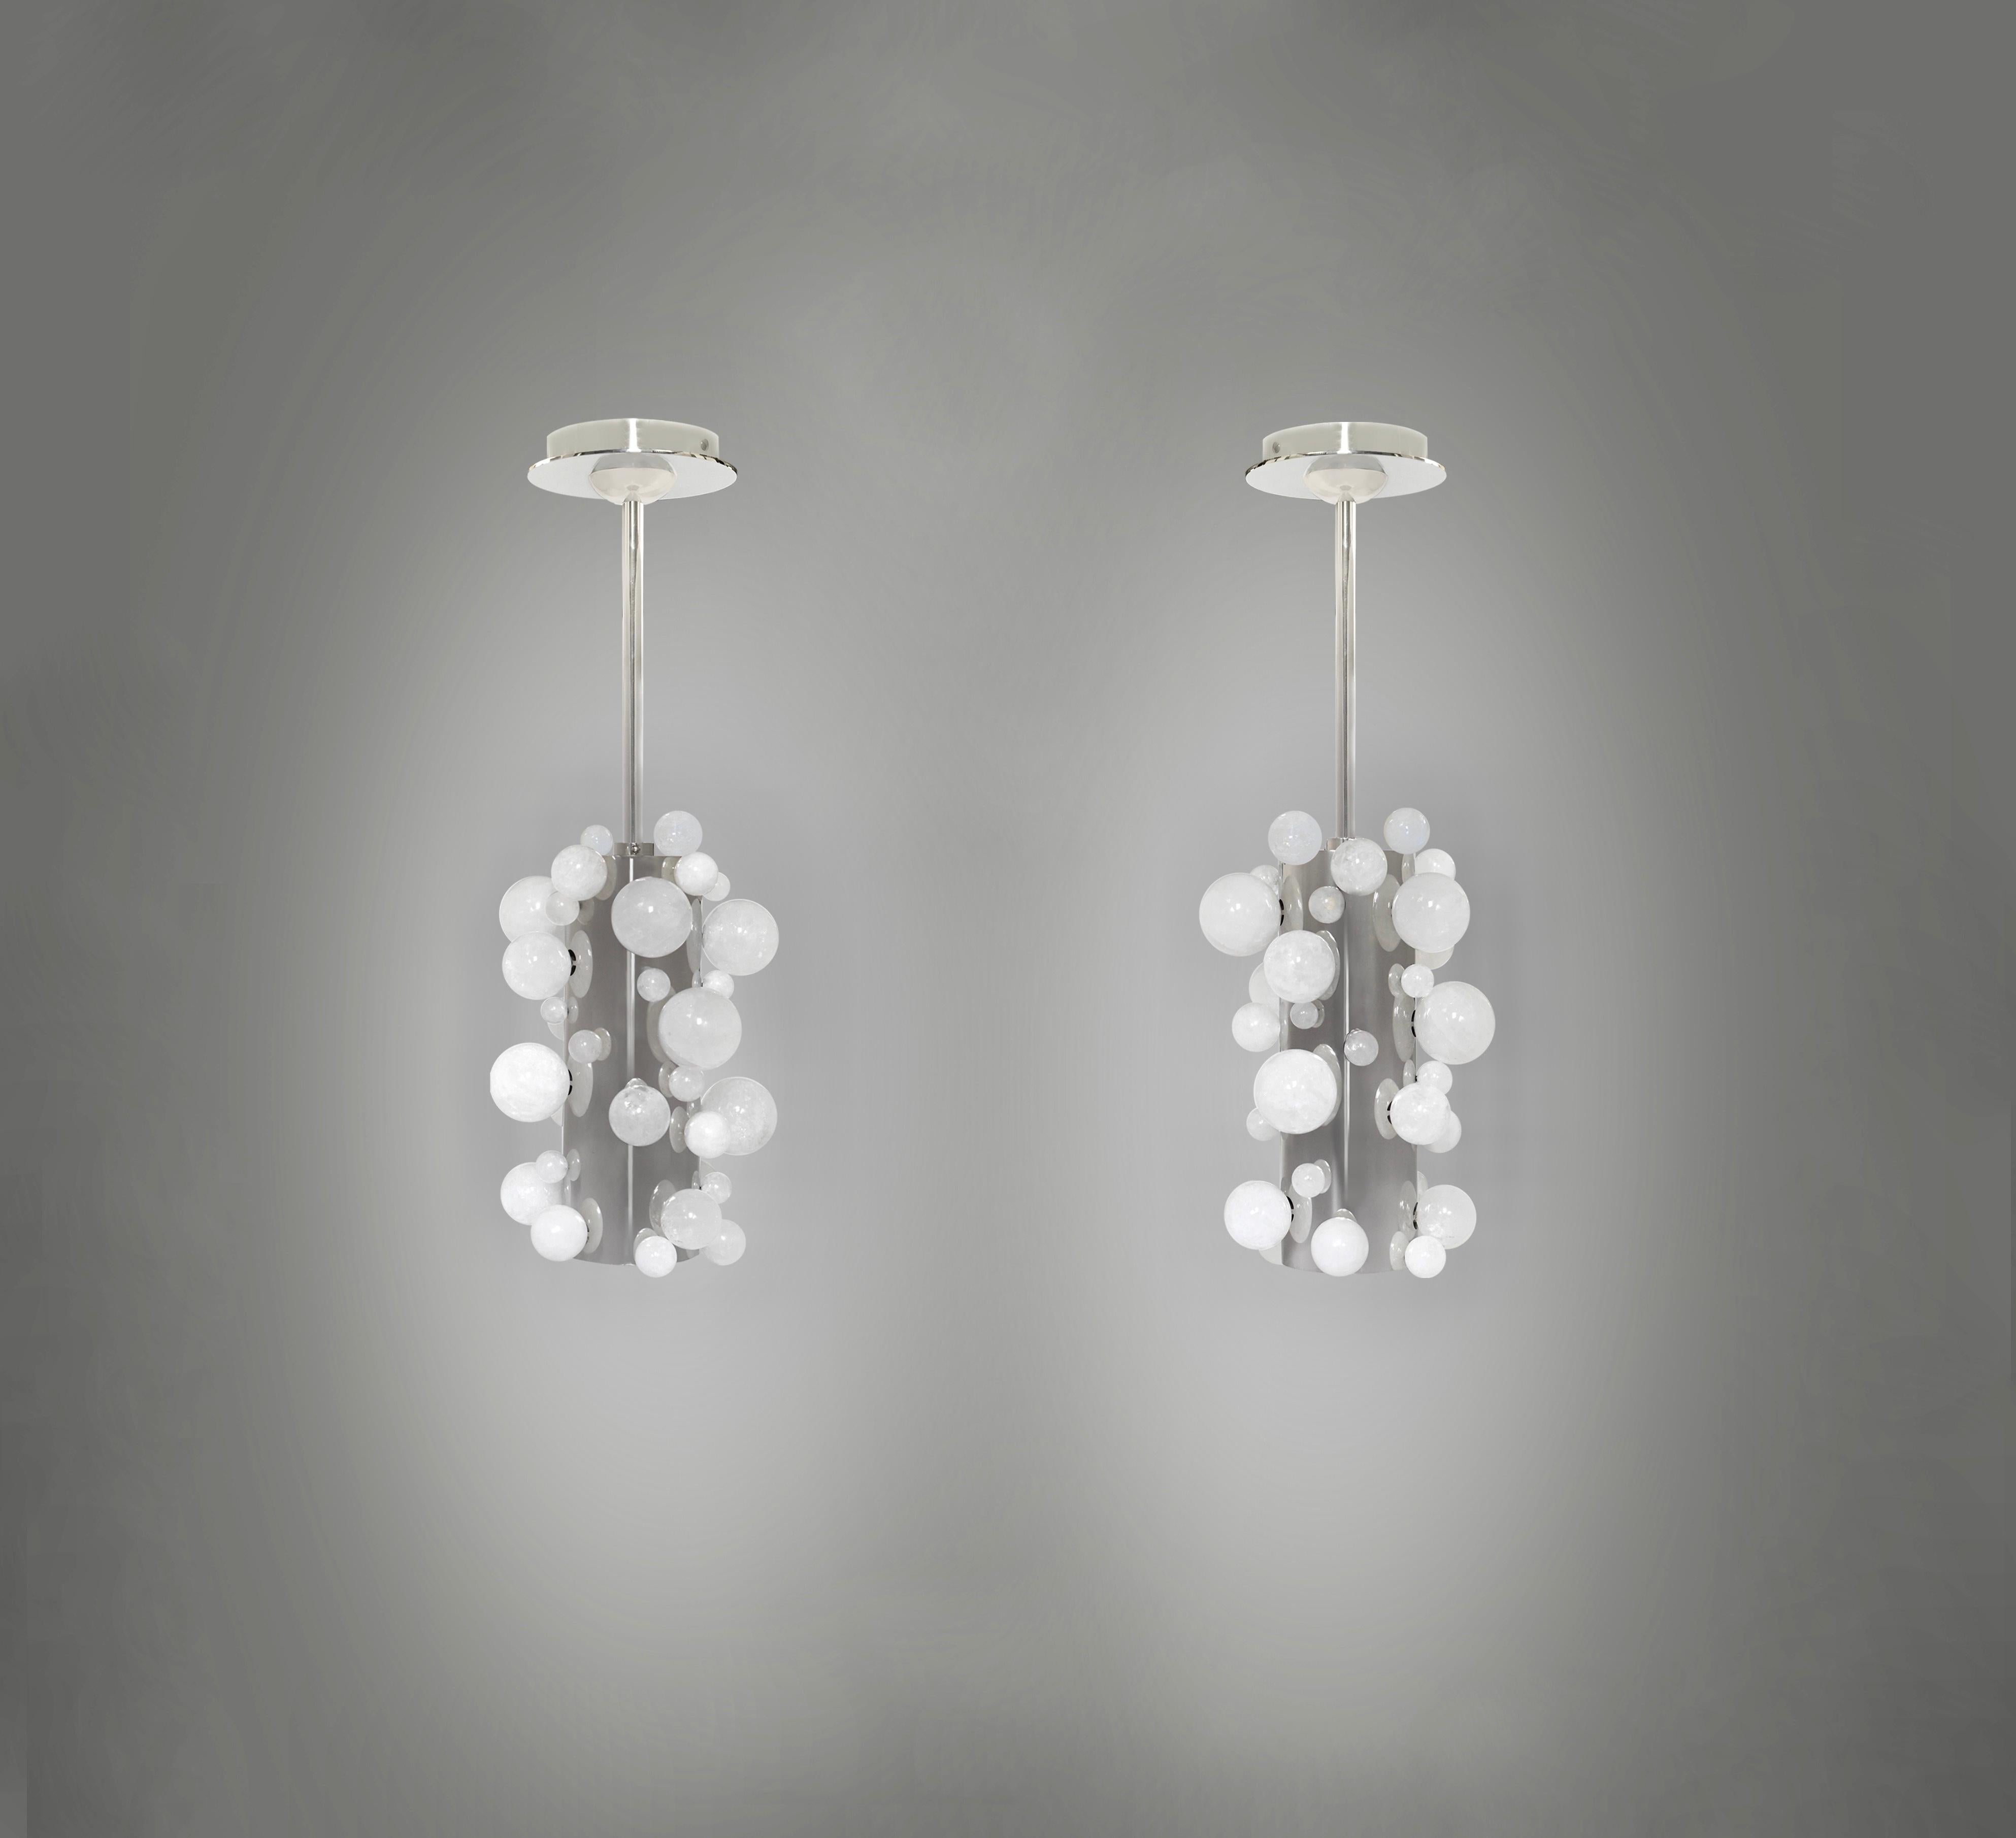 Pair of rock crystal bubble pendant lights with nickel plating finishes. Created by Phoenix Gallery, NYC.
Two sockets installed. Use LED warm light bulbs. 50w each. 100 w total.
Dimension of the pendant: 8